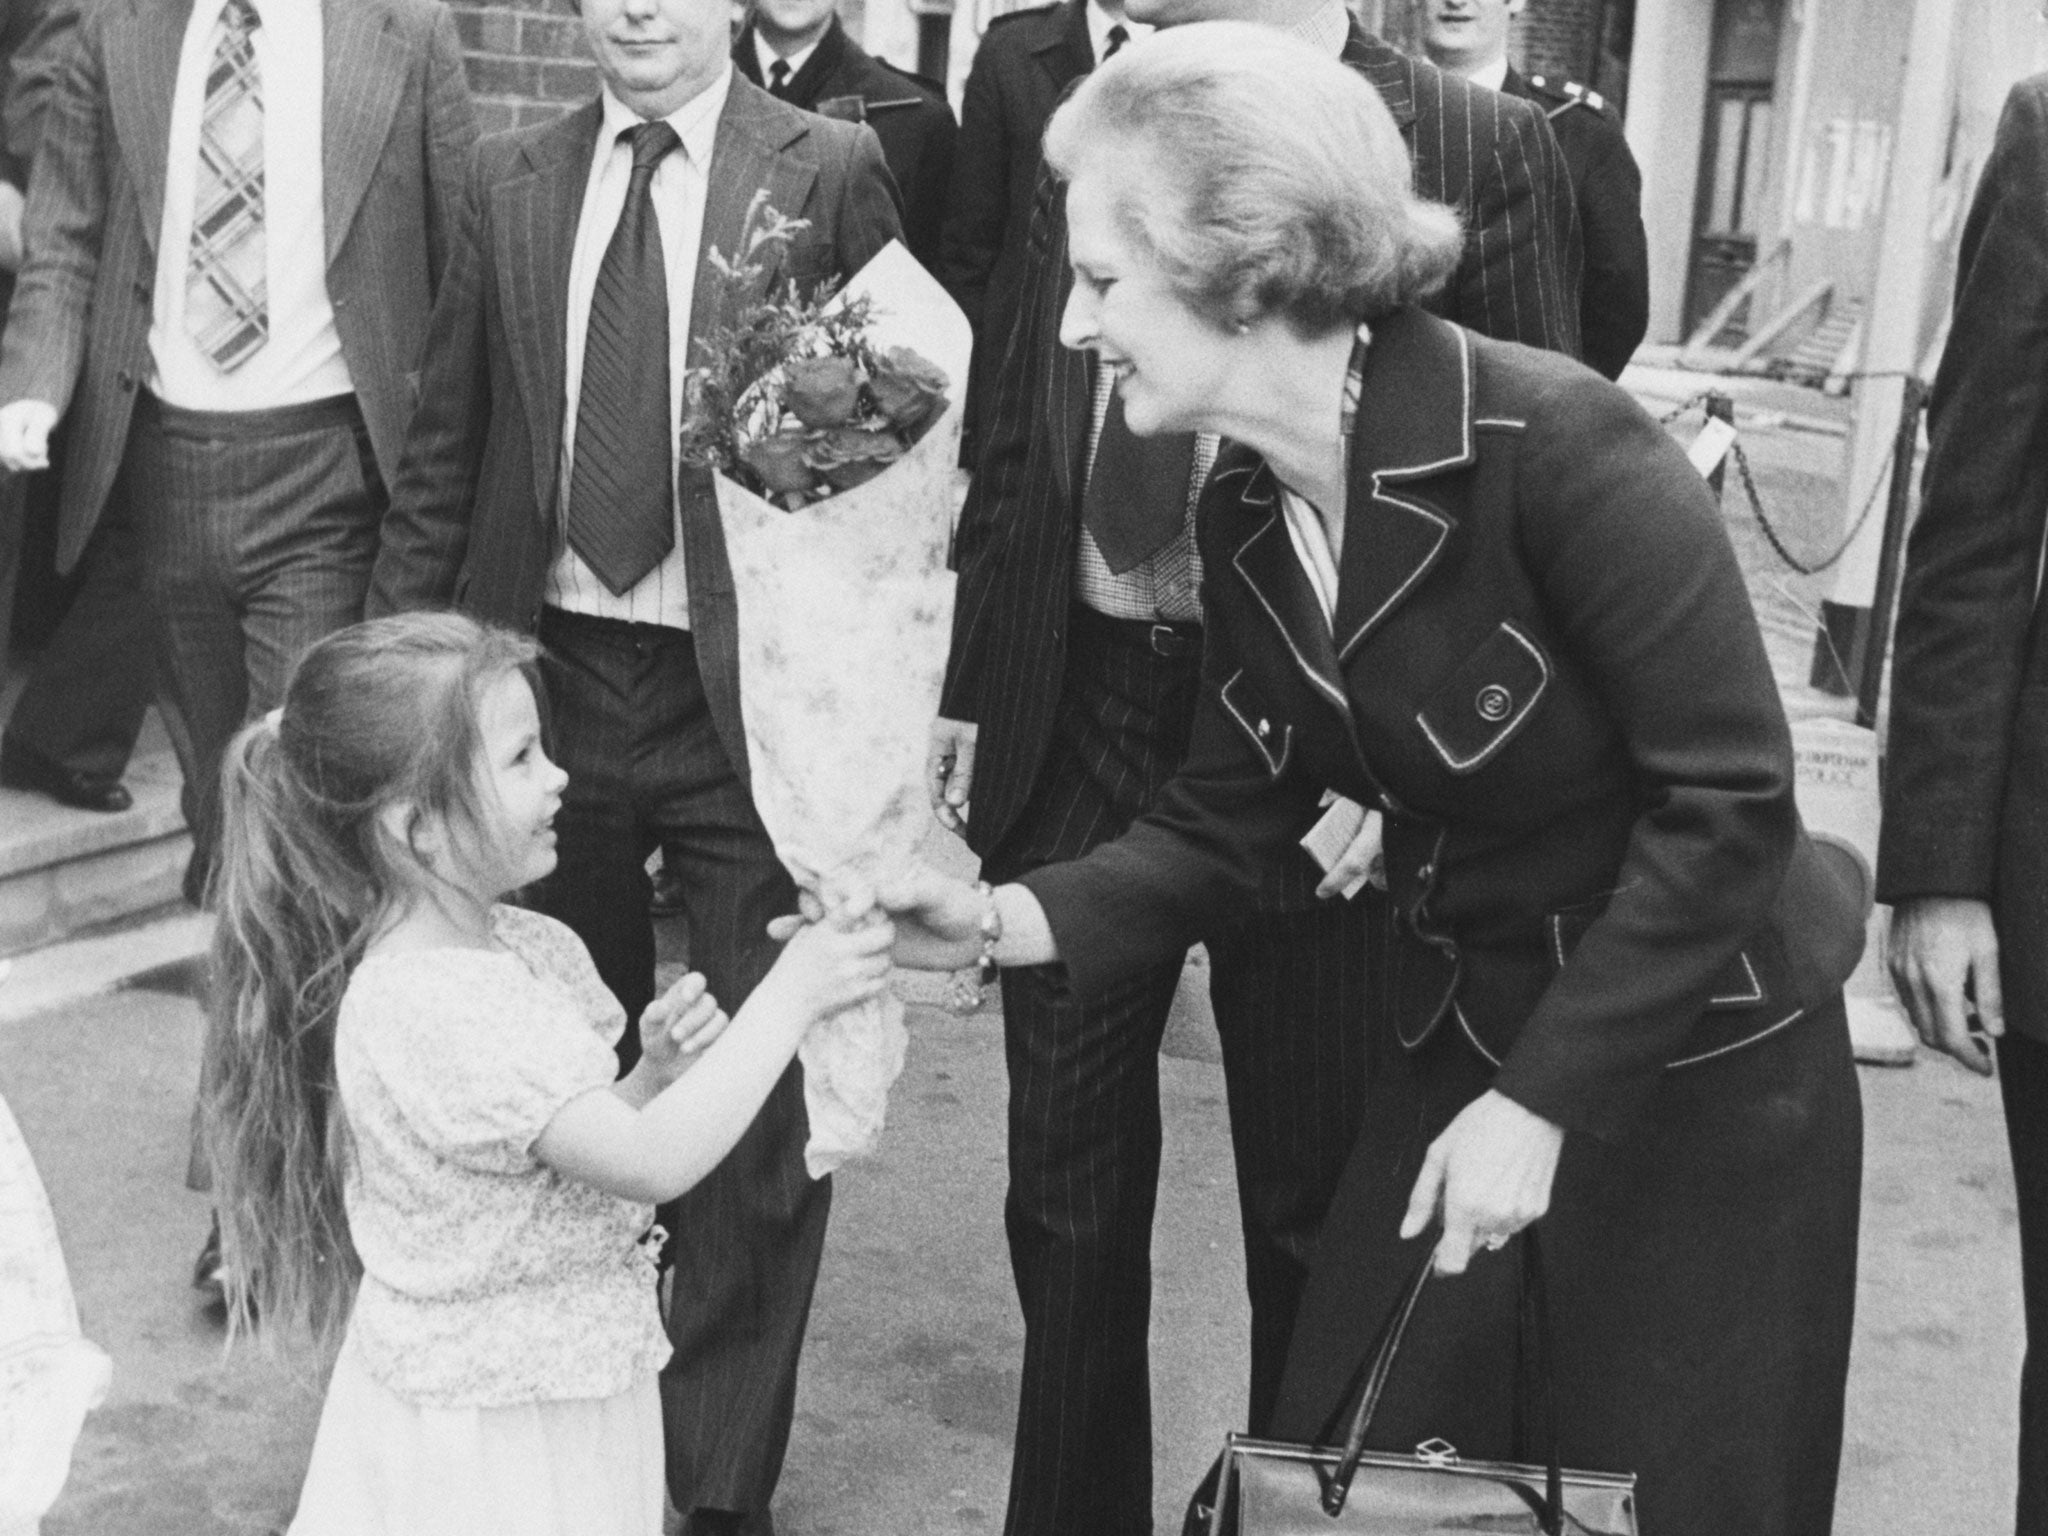 Margaret Thatcher, Leader of the Conservative Party, receives a bouquet of flowers from 4-year-old Nancy Turner, as she leaves the Greenwood Theatre on Weston Street, London, 30th April 1979.